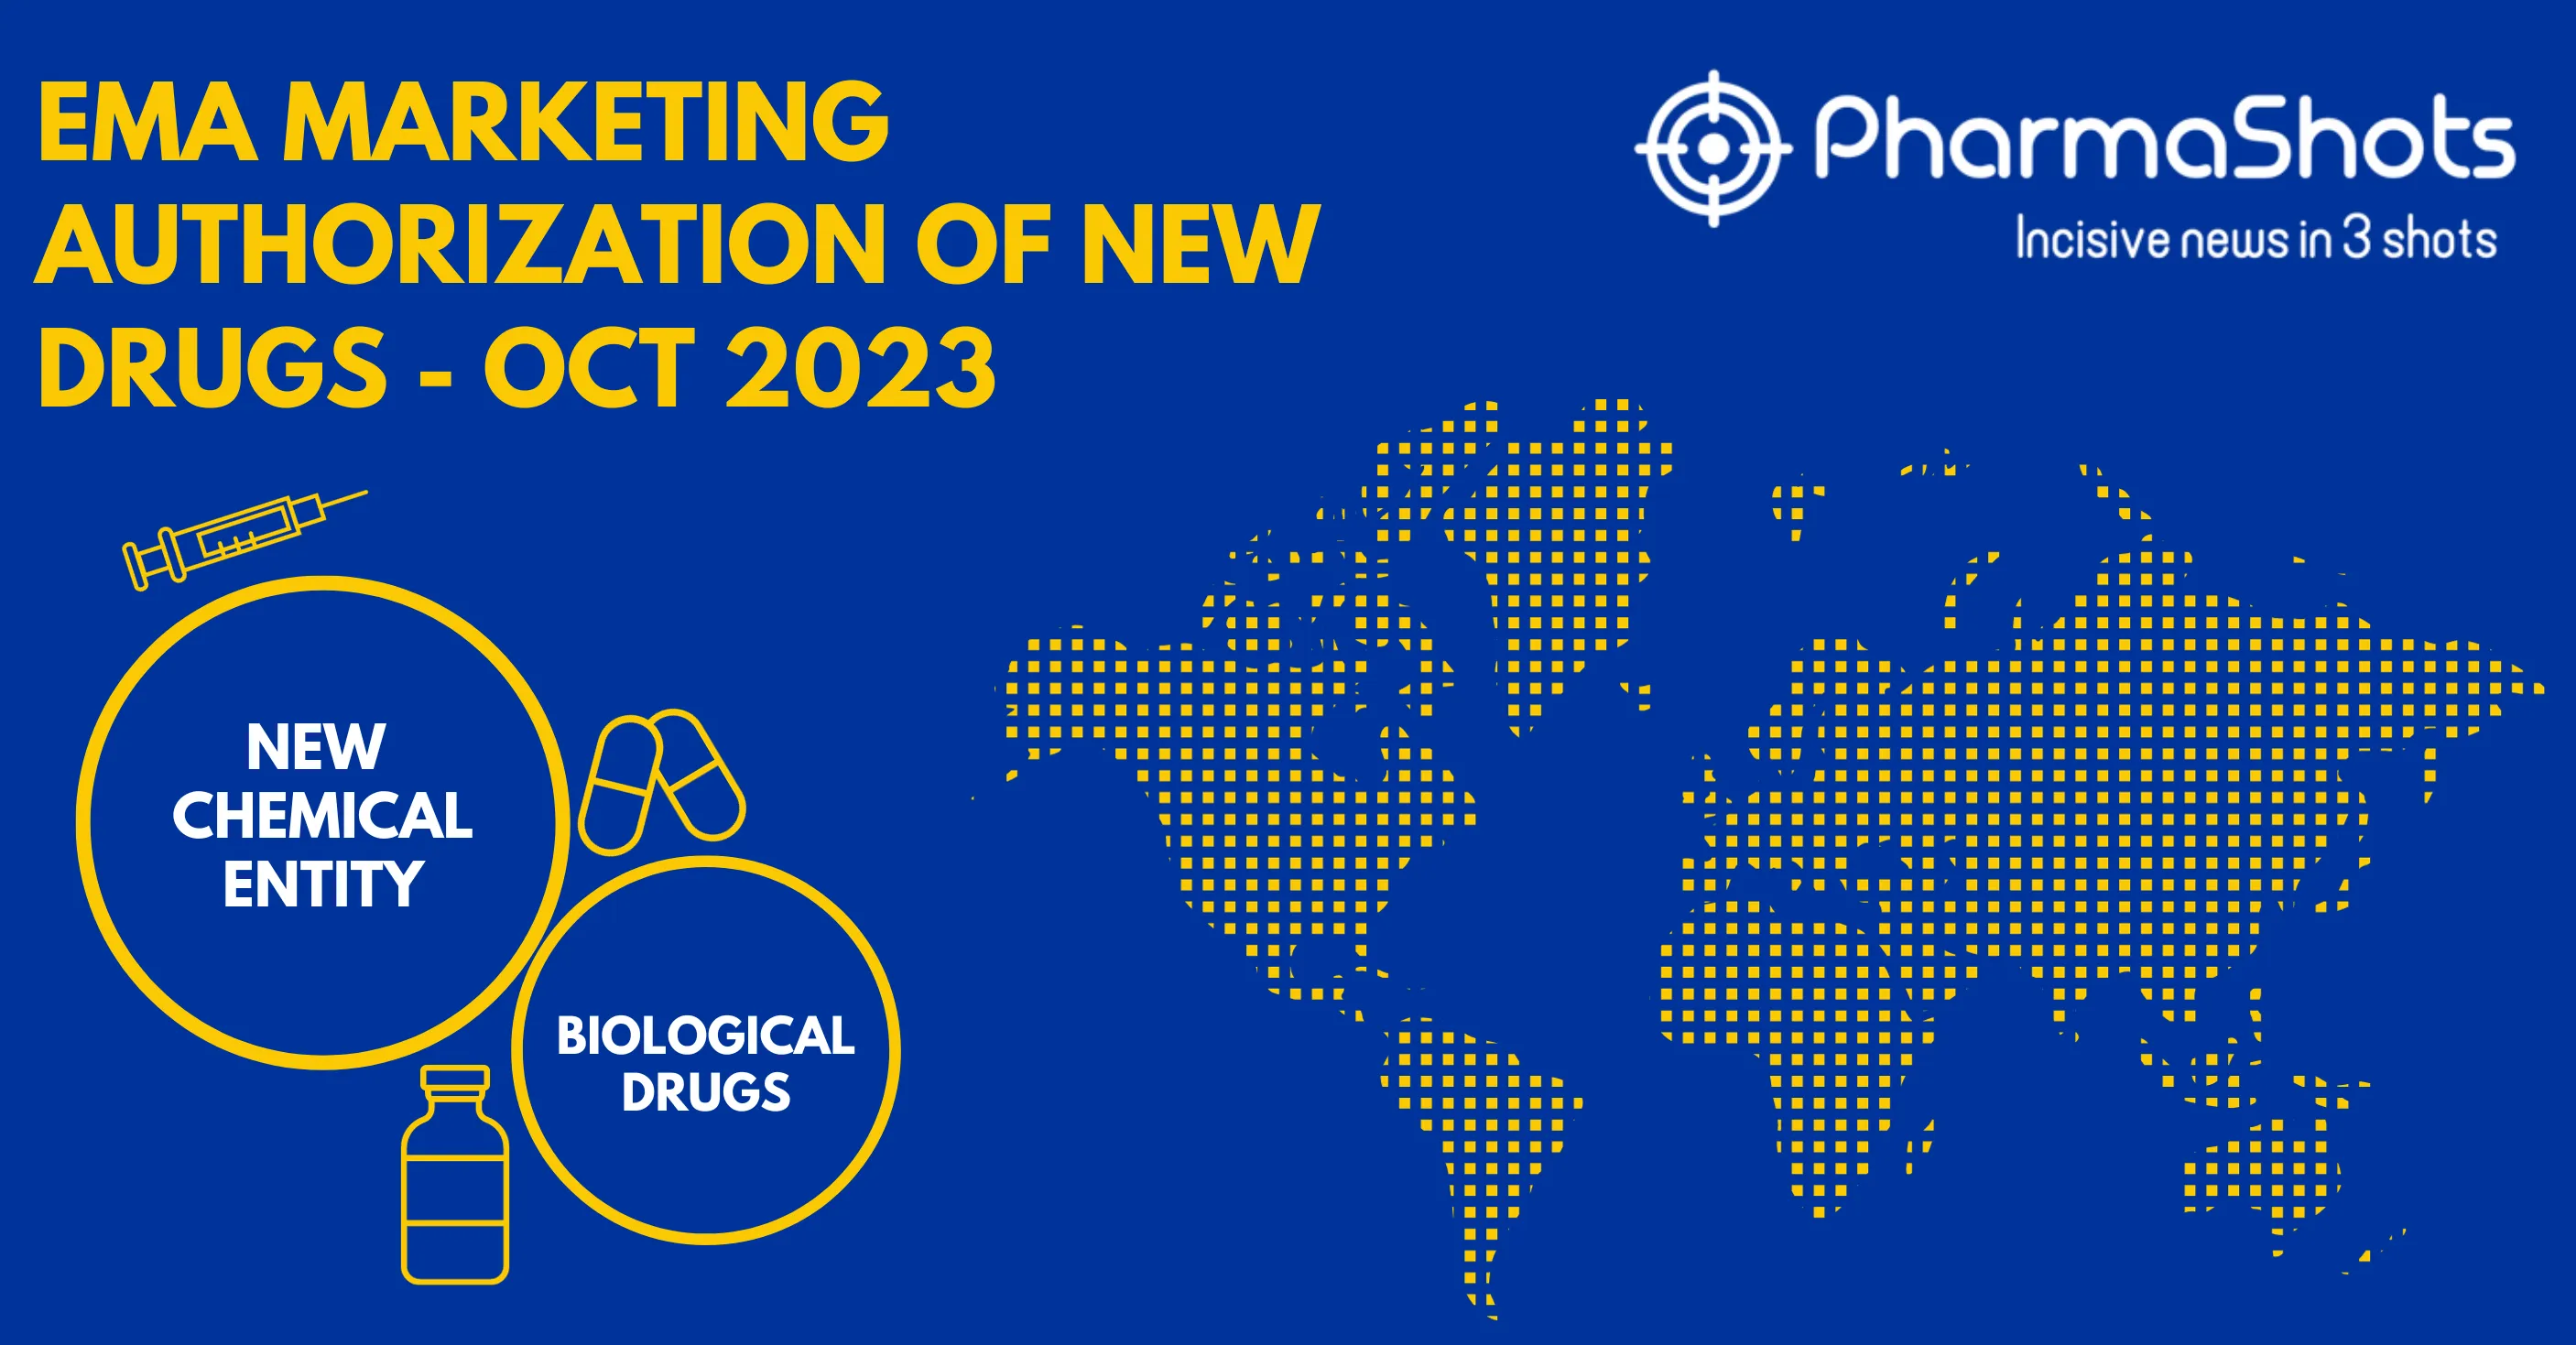 Insights+: EMA Marketing Authorization of New Drugs in October 2023